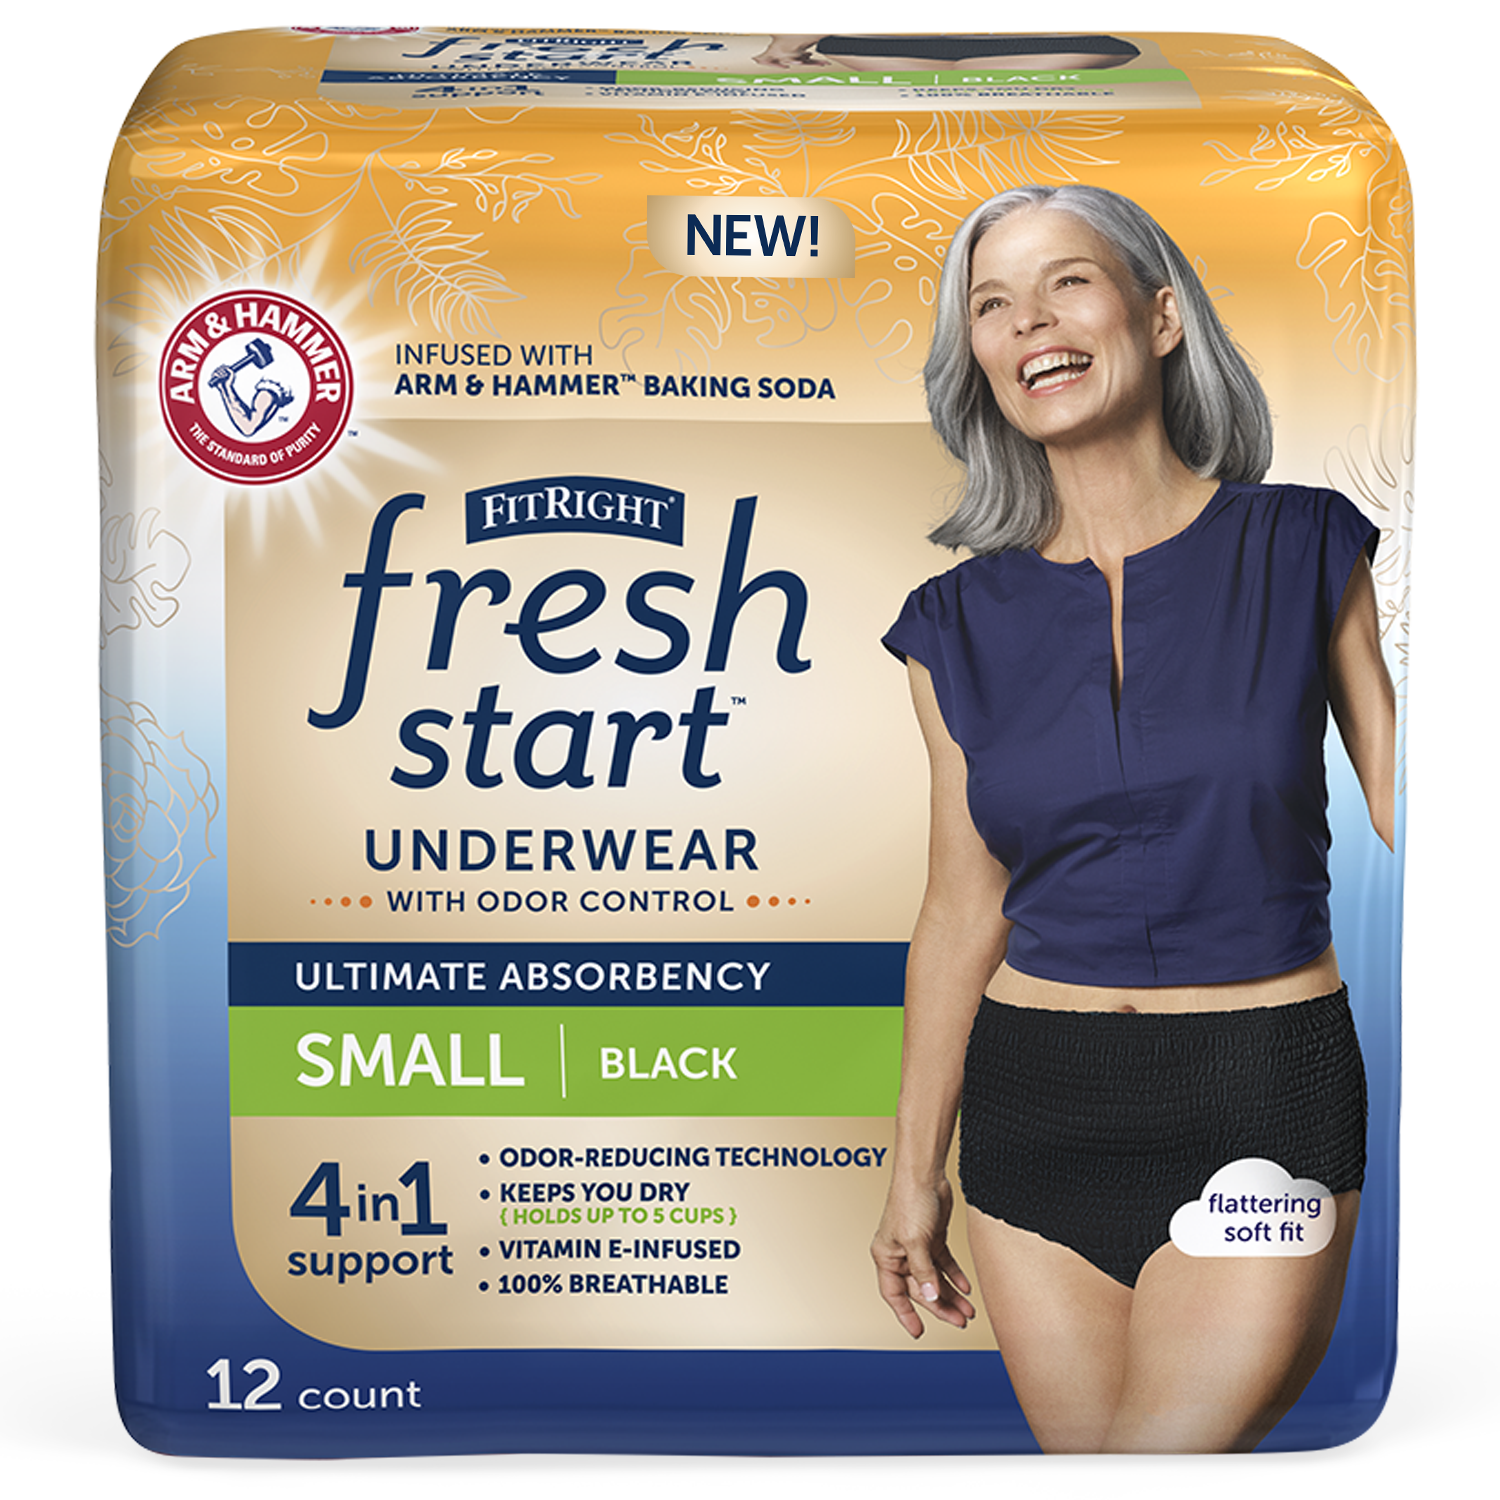  FitRight Fresh Start Incontinence and Postpartum